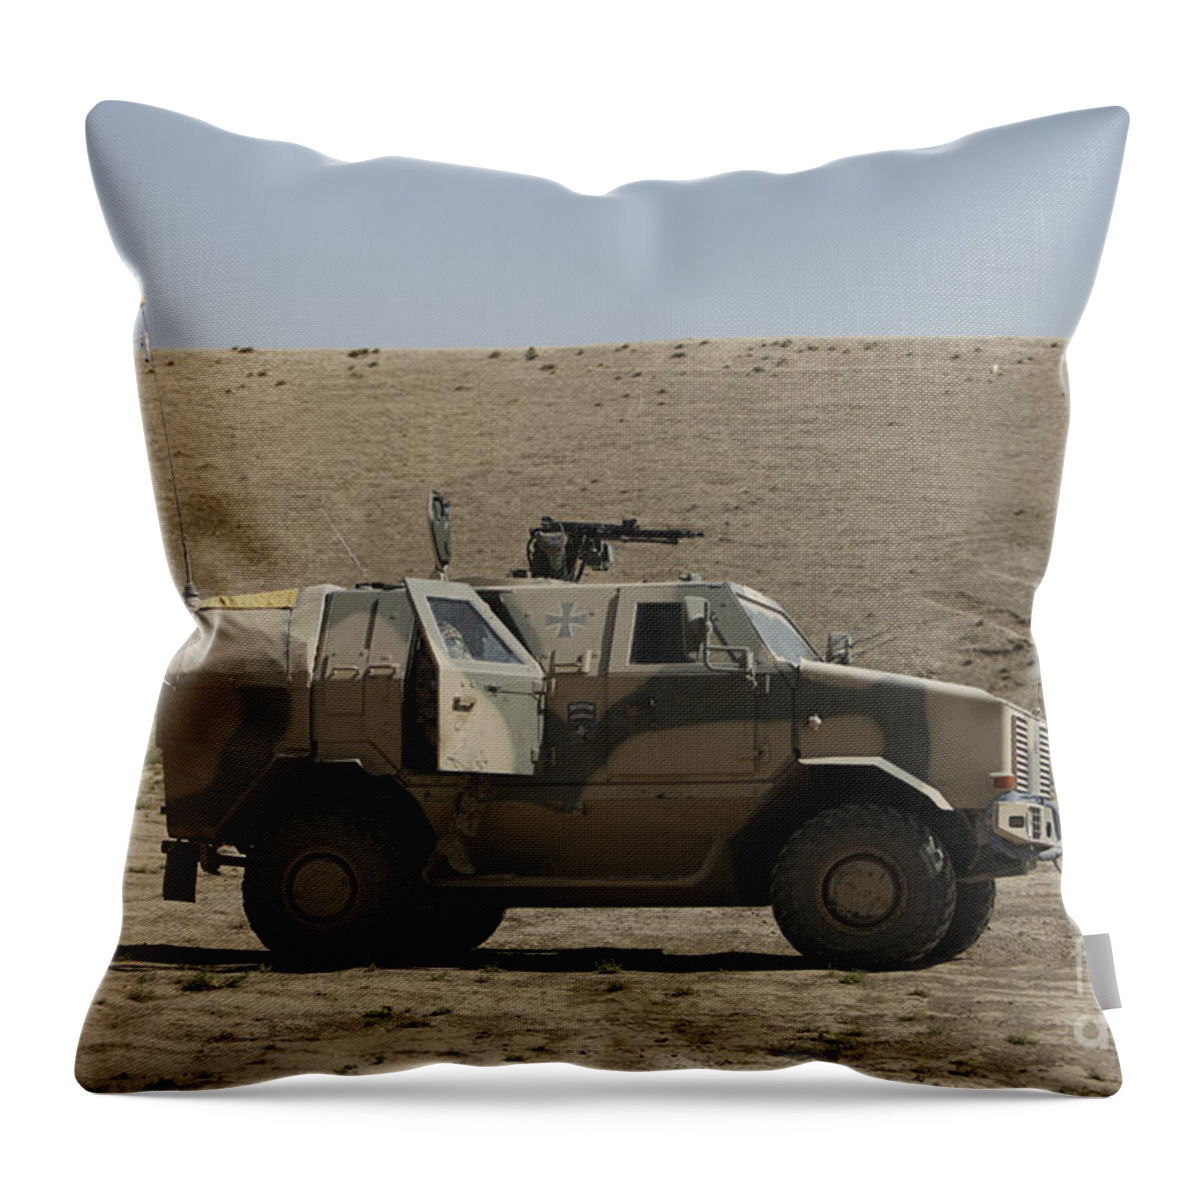 Operation Enduring Freedom Throw Pillow featuring the photograph The German Army Atf Dingo Armored by Terry Moore